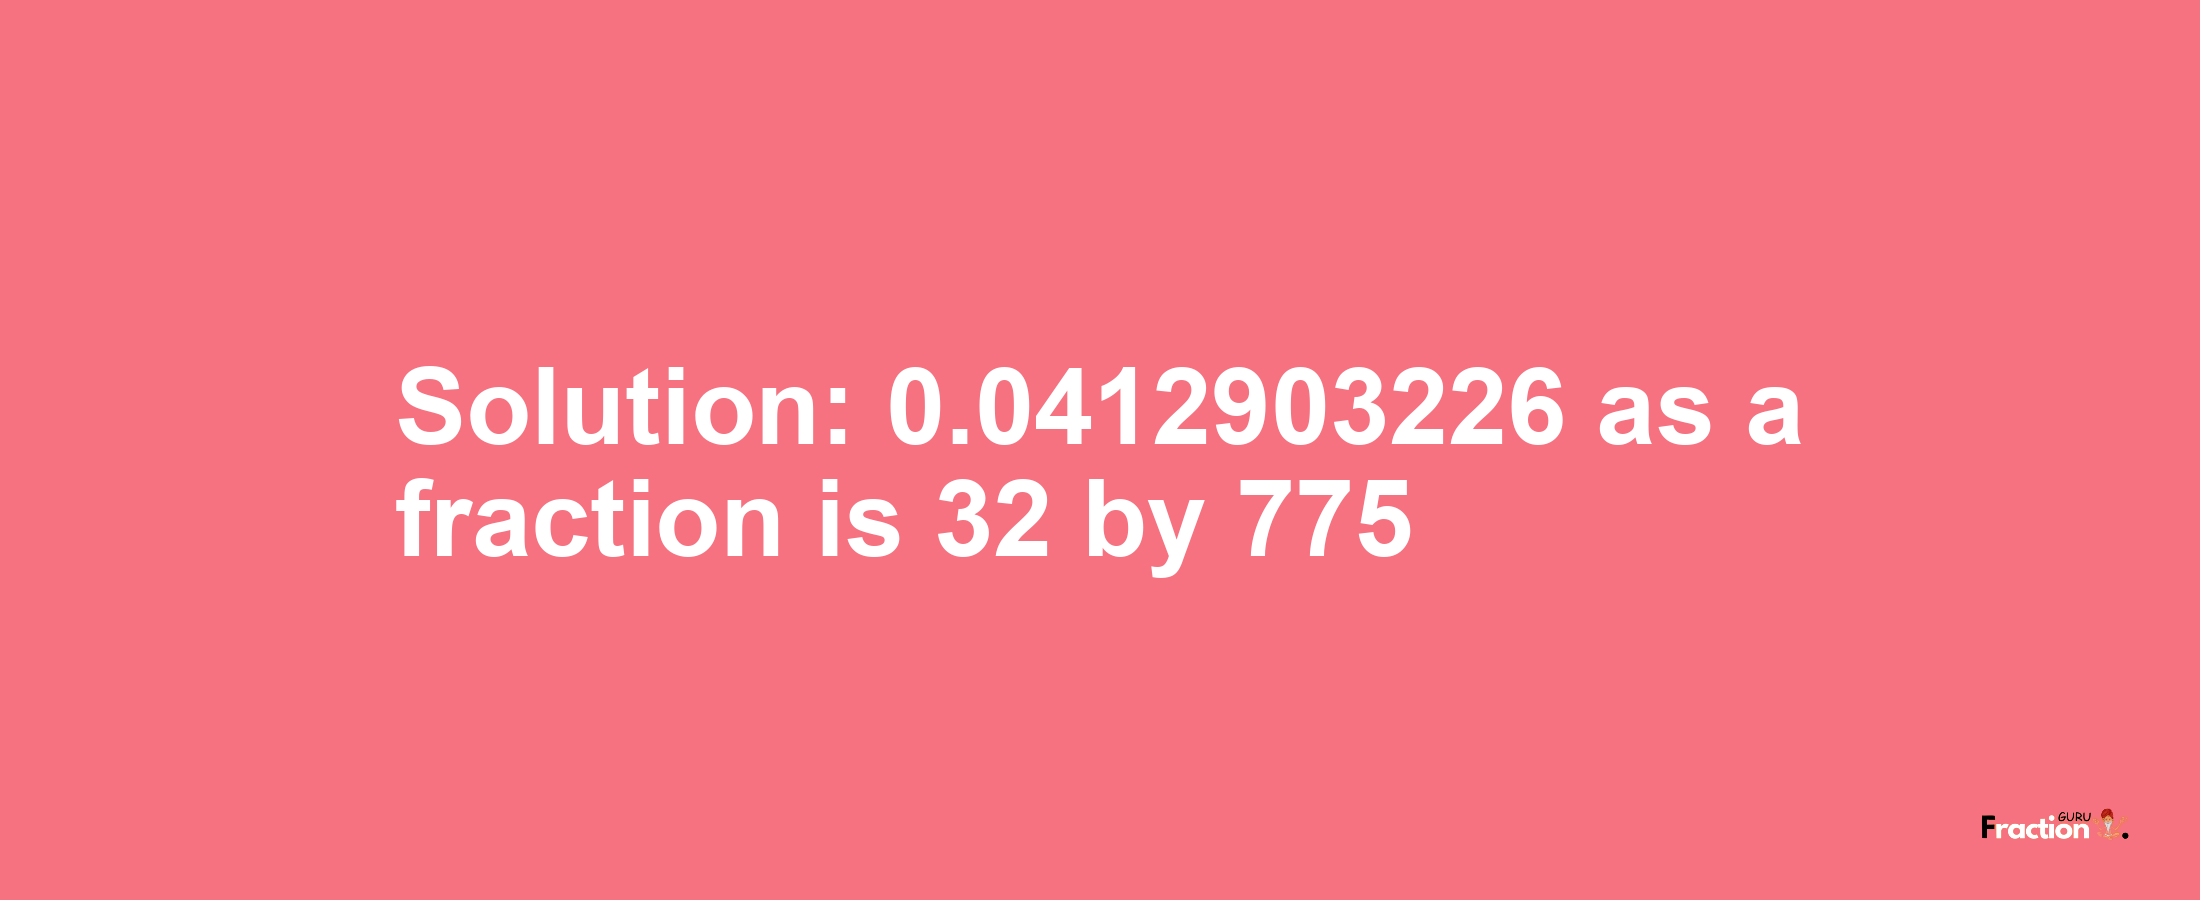 Solution:0.0412903226 as a fraction is 32/775